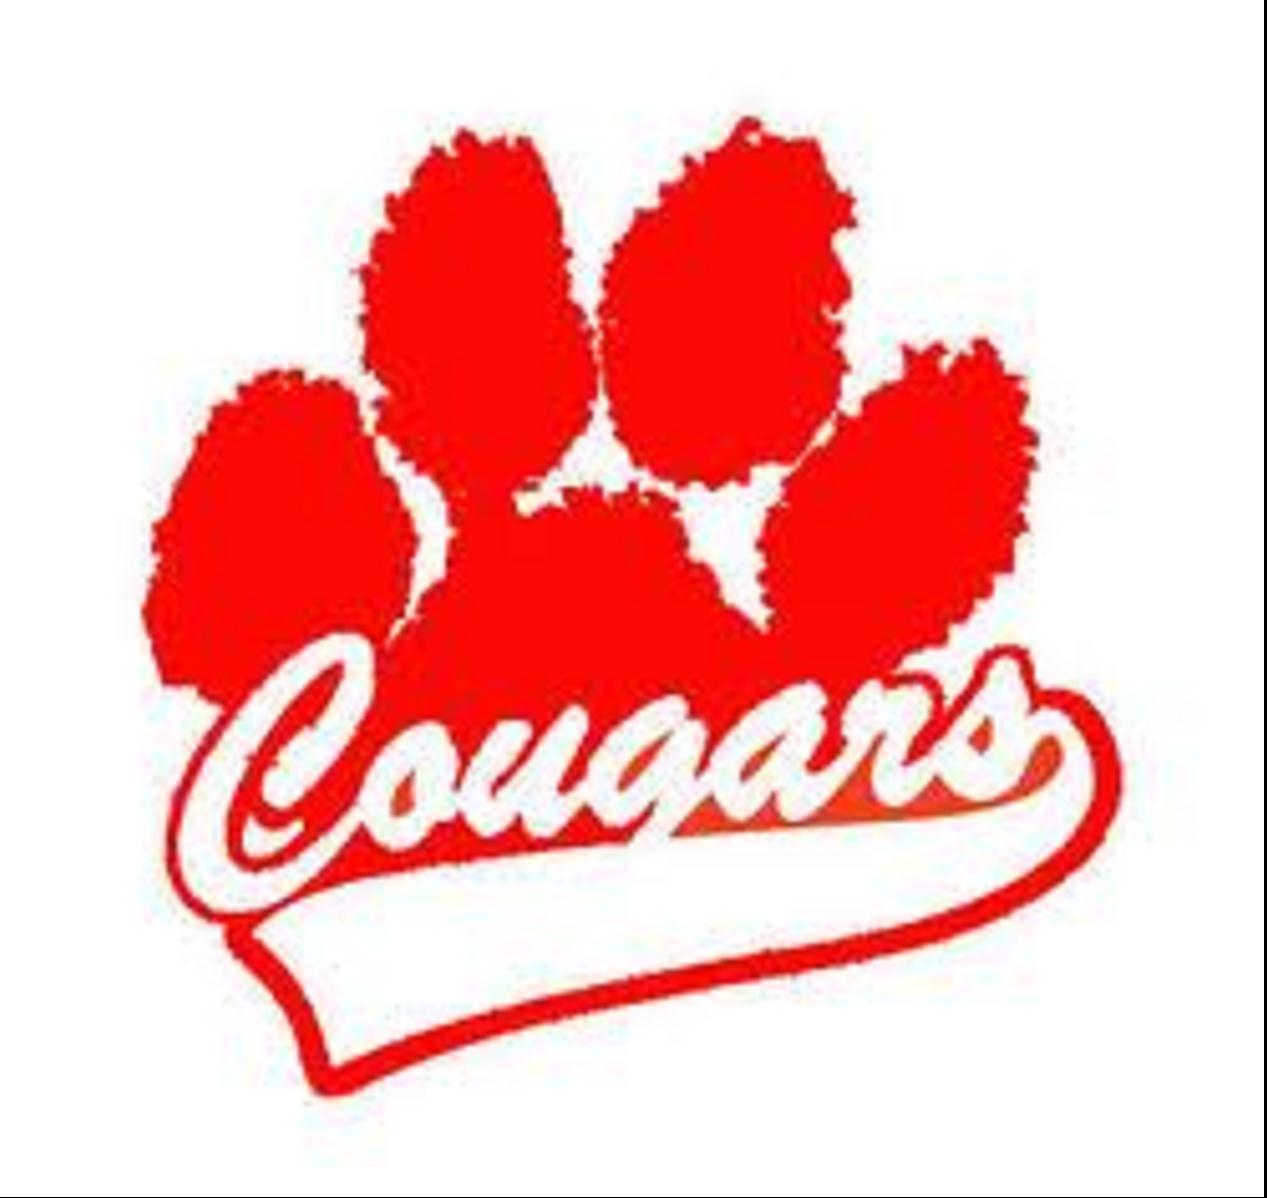 cougar paw pictures